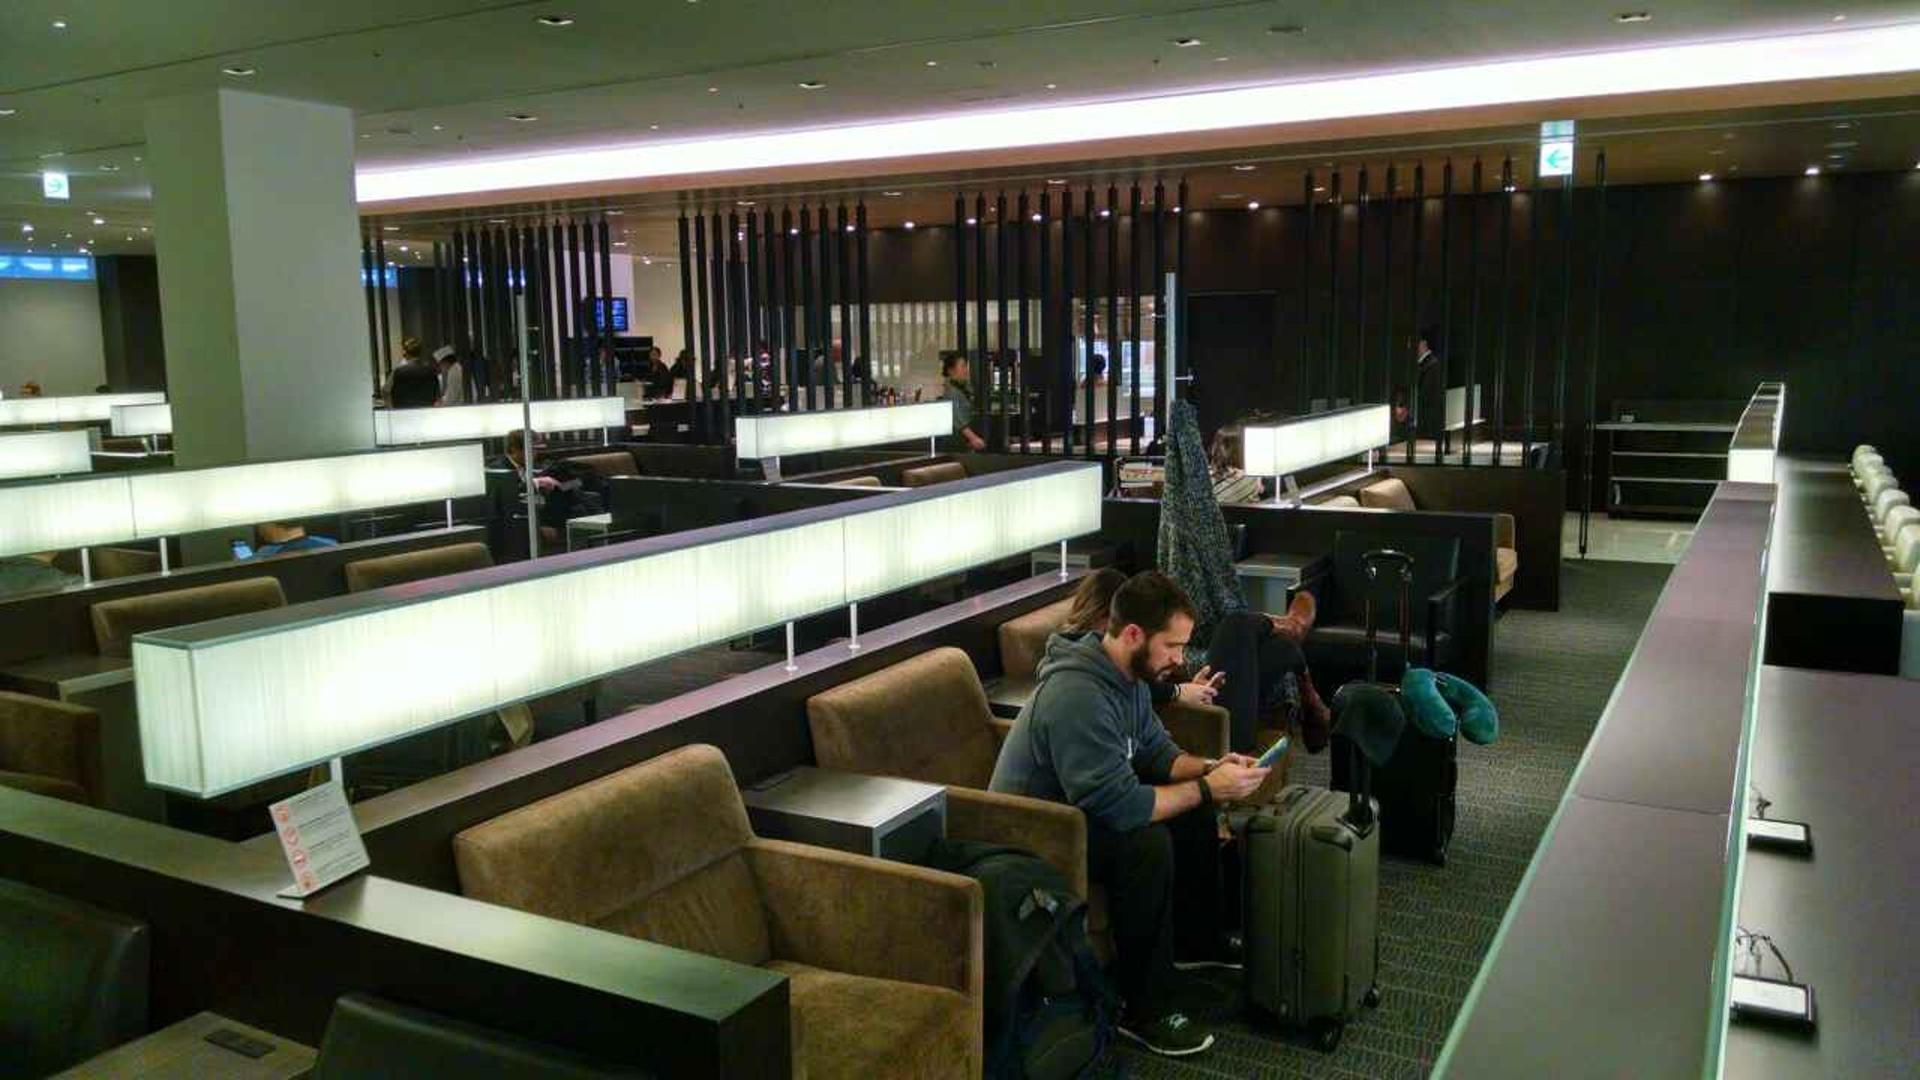 All Nippon Airways ANA Lounge image 29 of 39